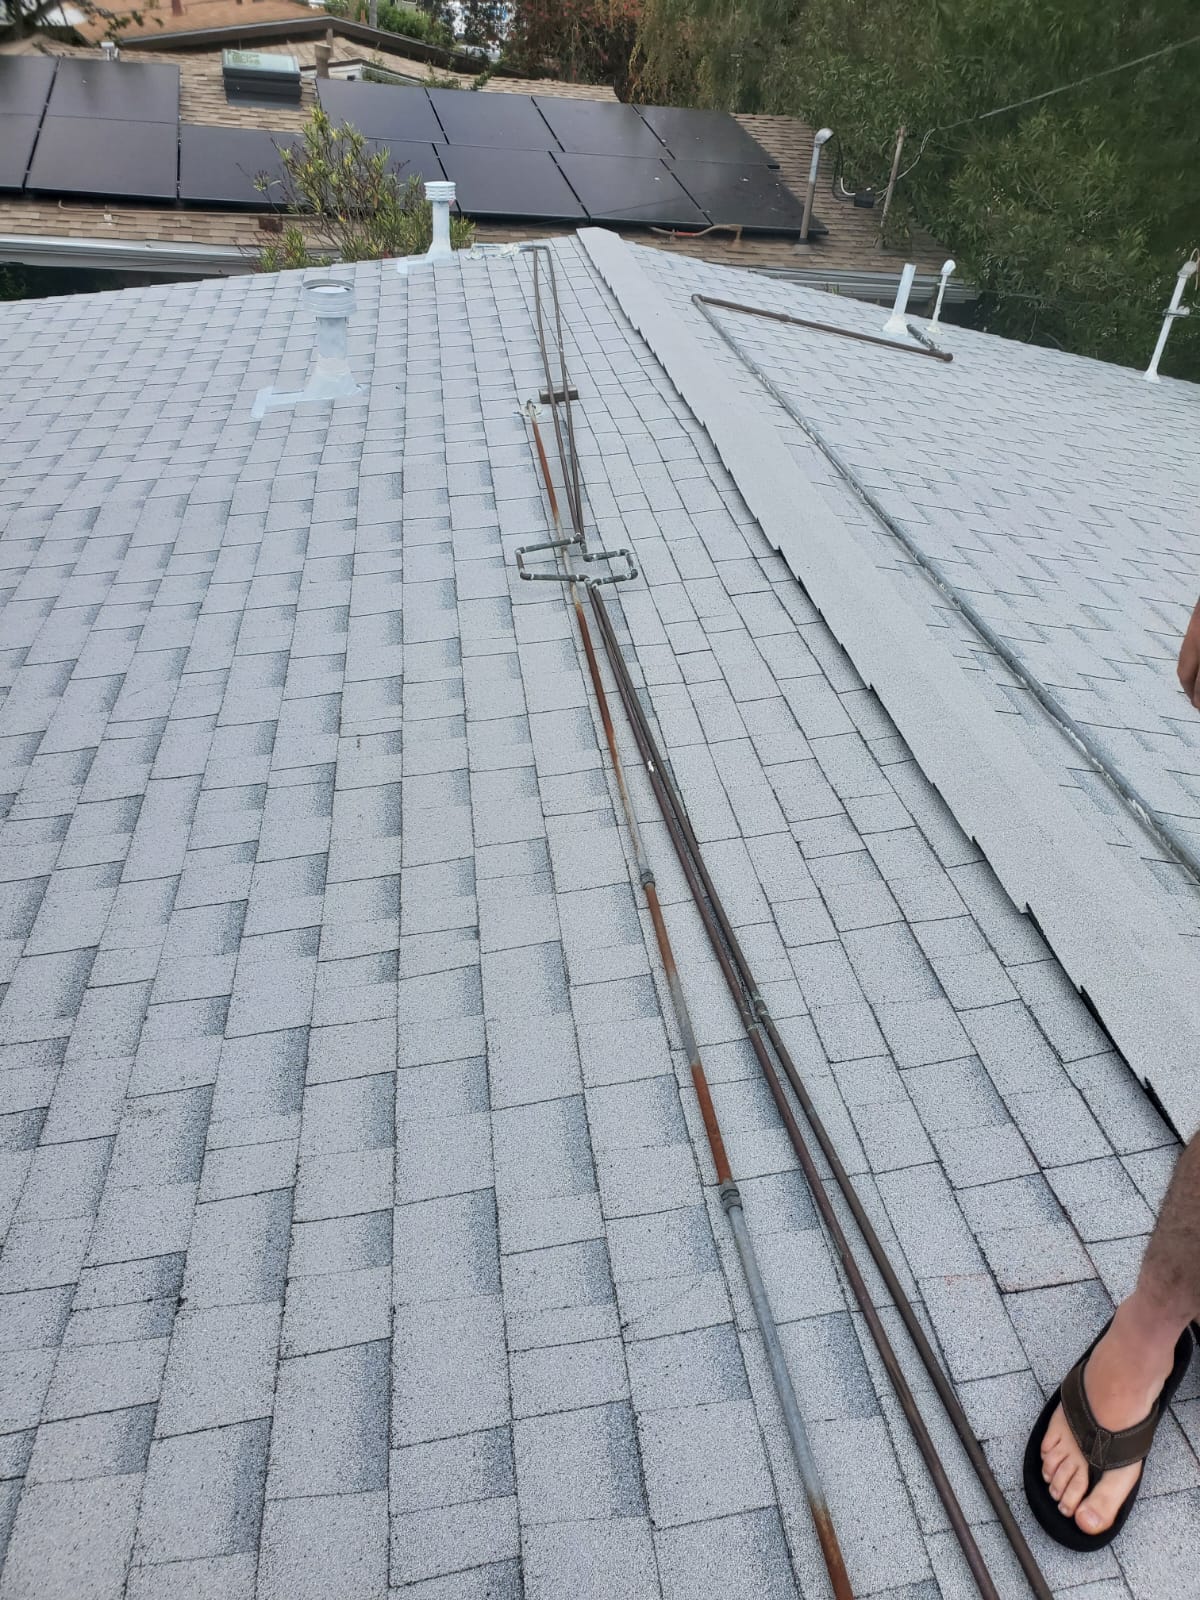 Roof Installation in San Diego, CA 92117